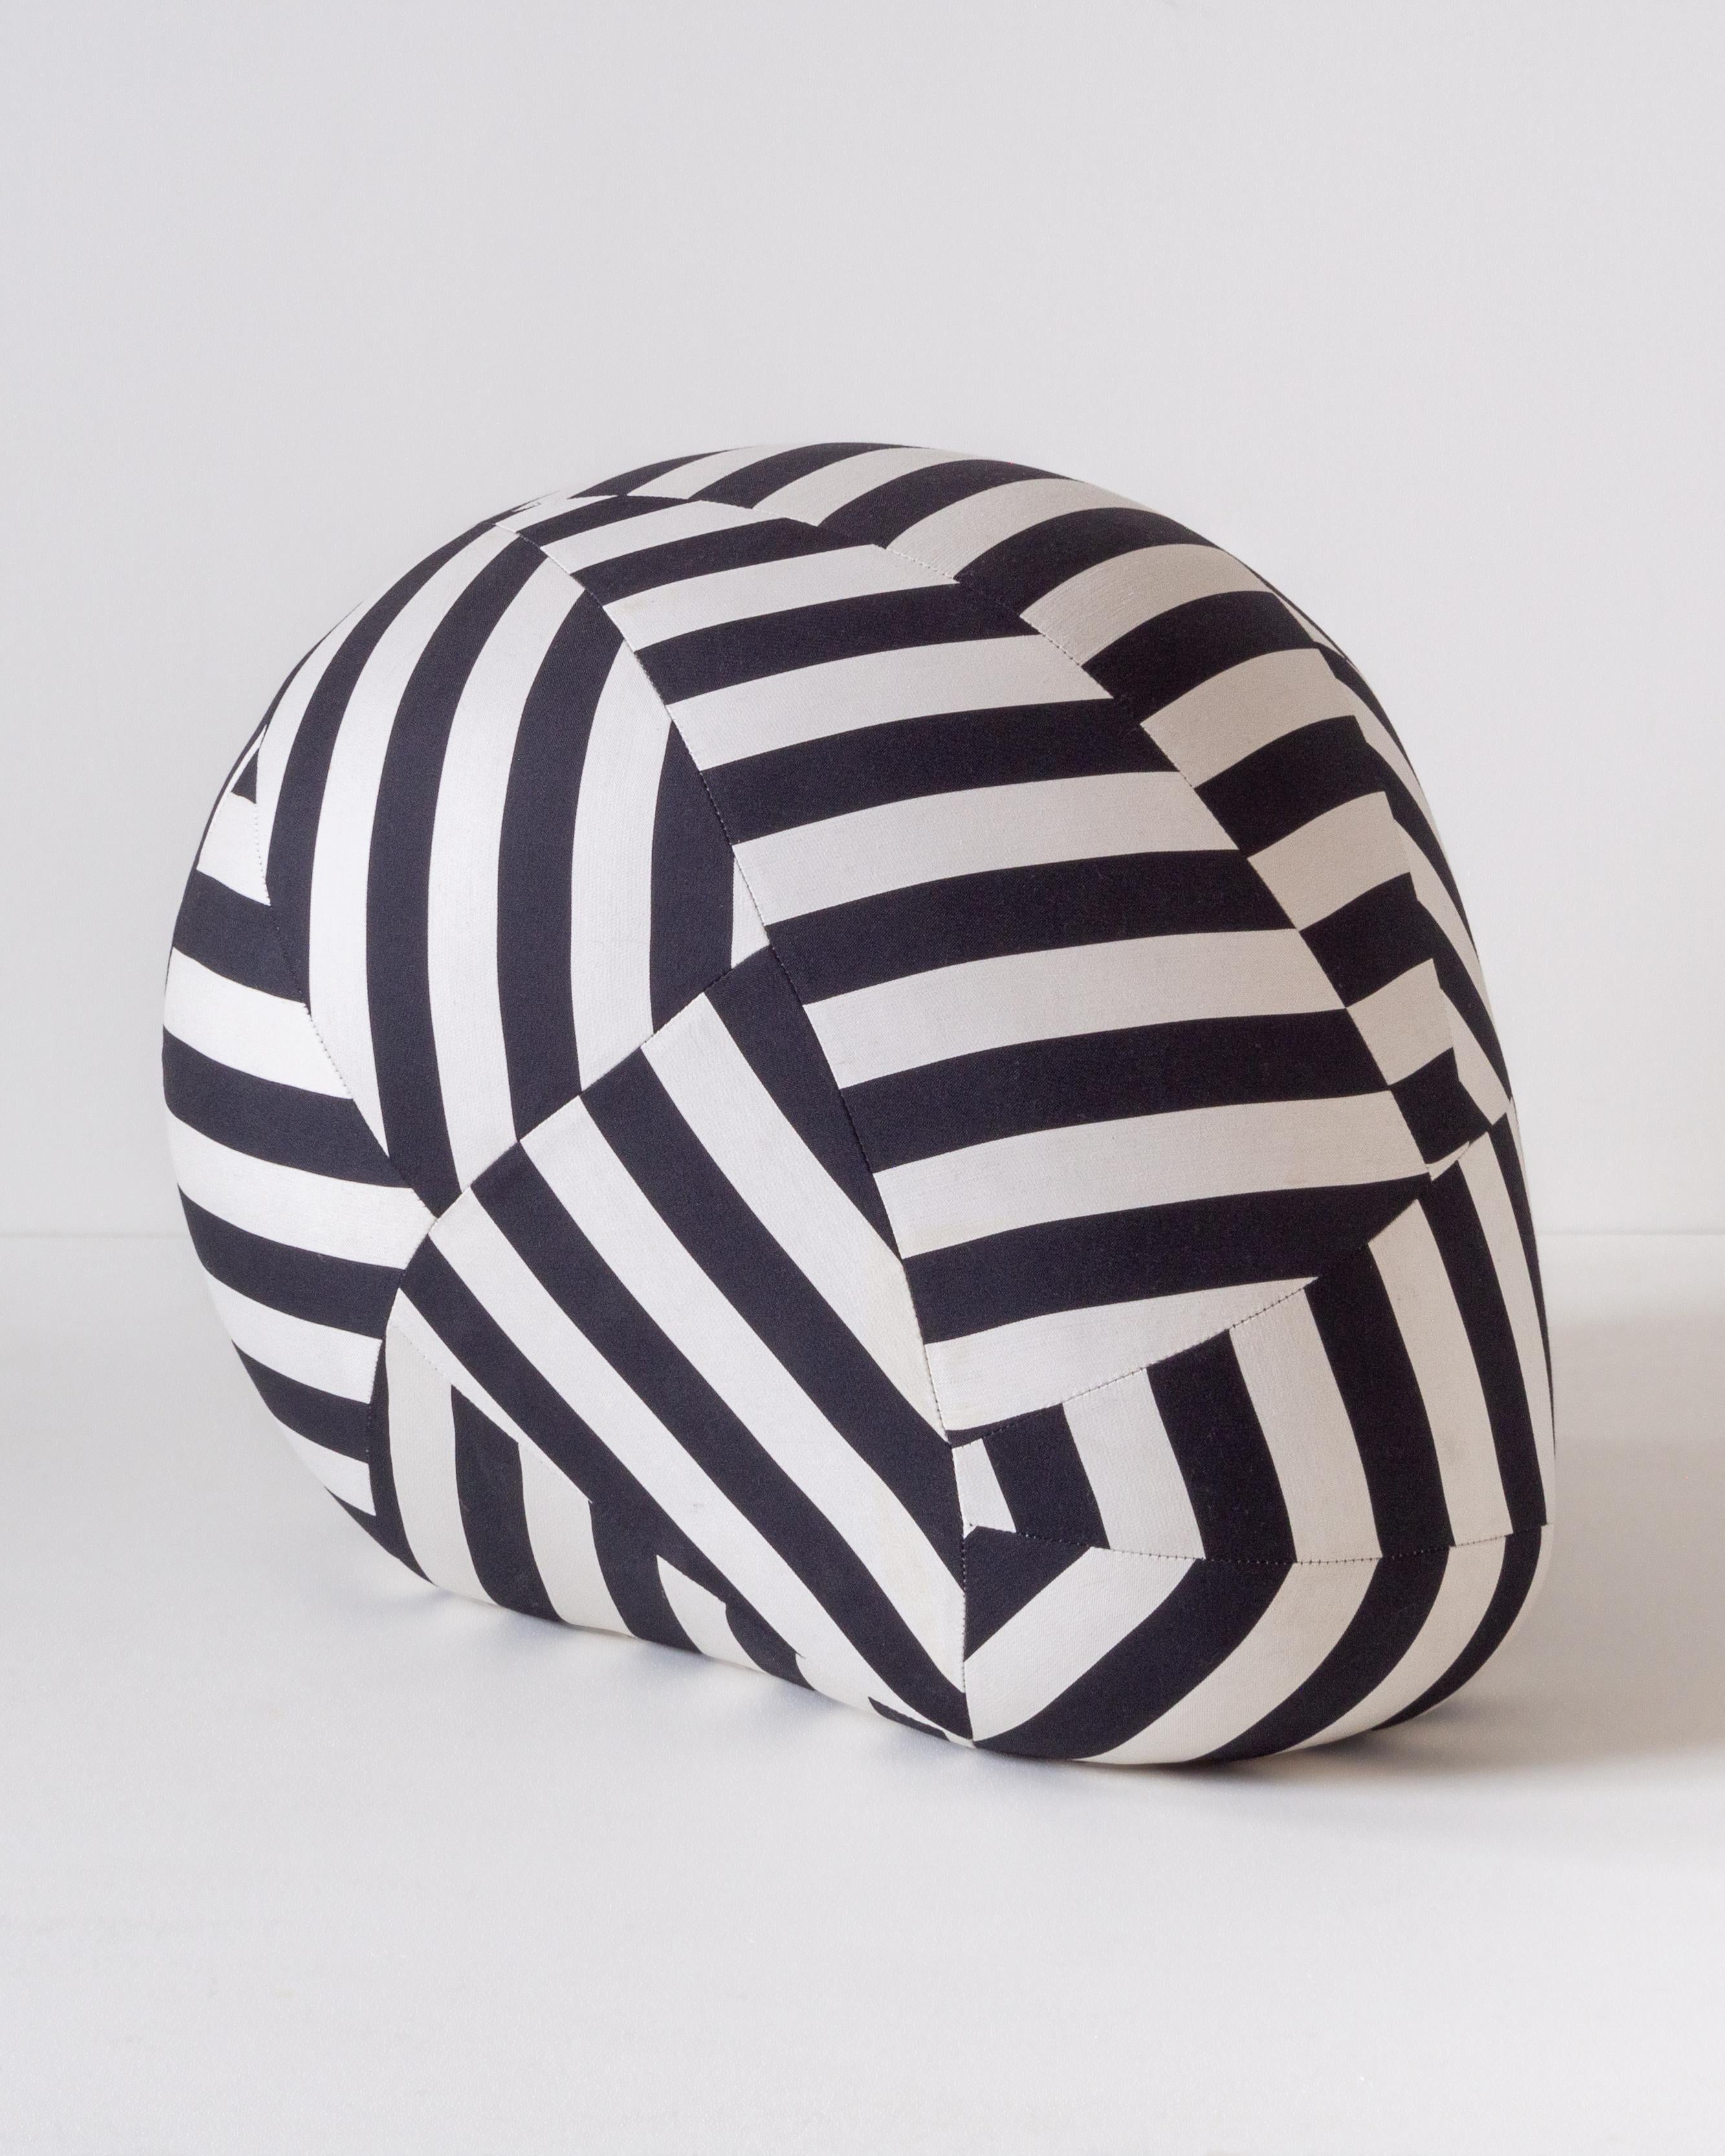 A big and gentle pouf with a distinctive presence, energizing any environment it is put in. Smooth, sculptural, graphic, and bold, it is the result of merging modern technology with ancient manufacturing techniques.

Crafted with precision, a